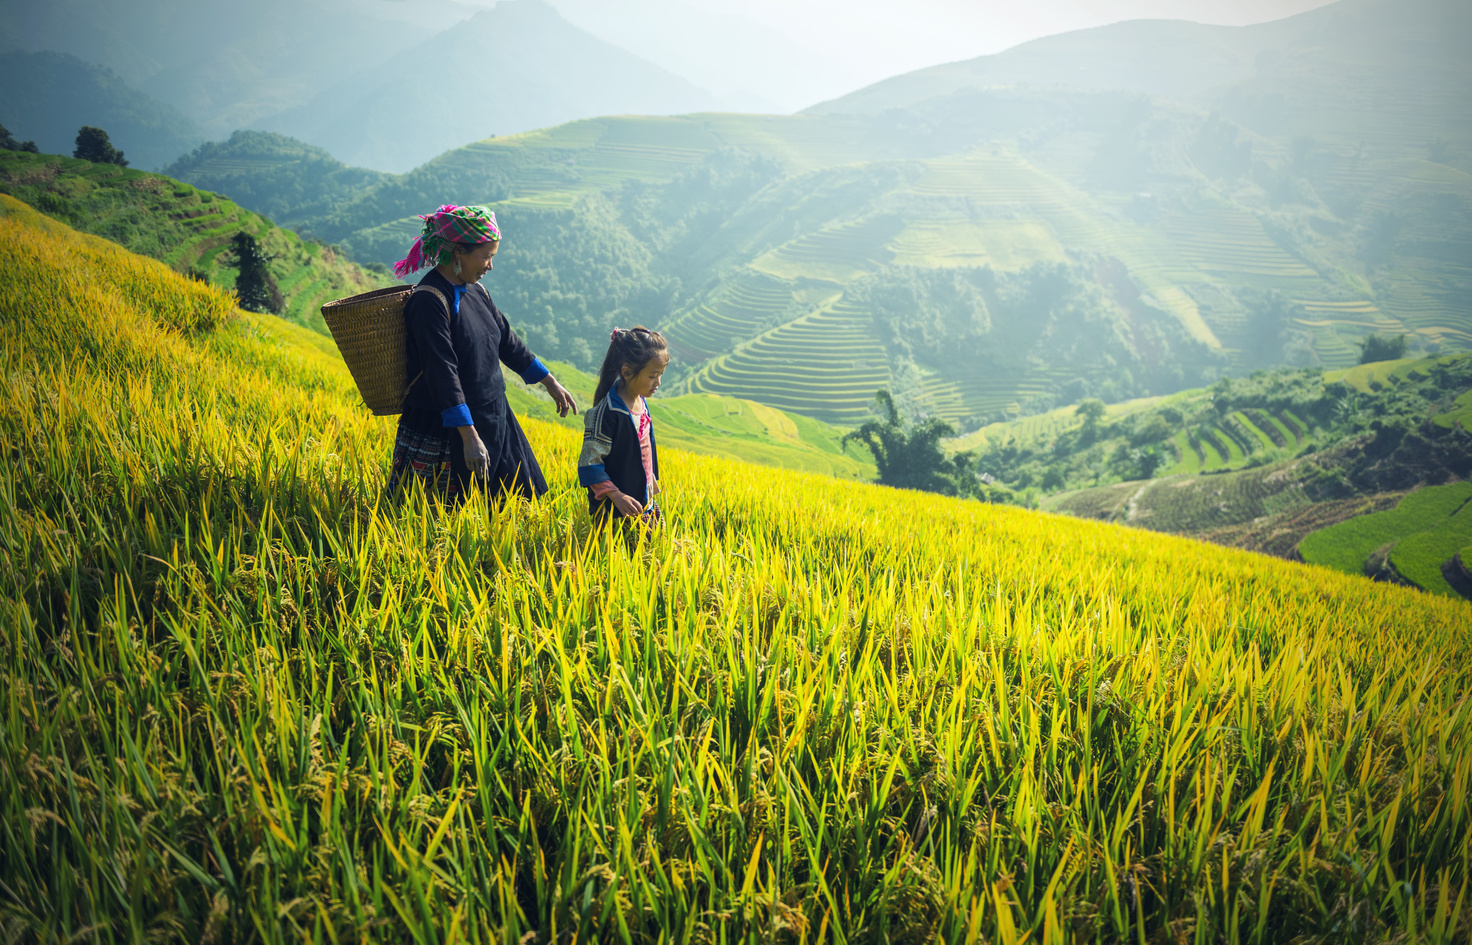 Asian Mother in Child in the Rice Field